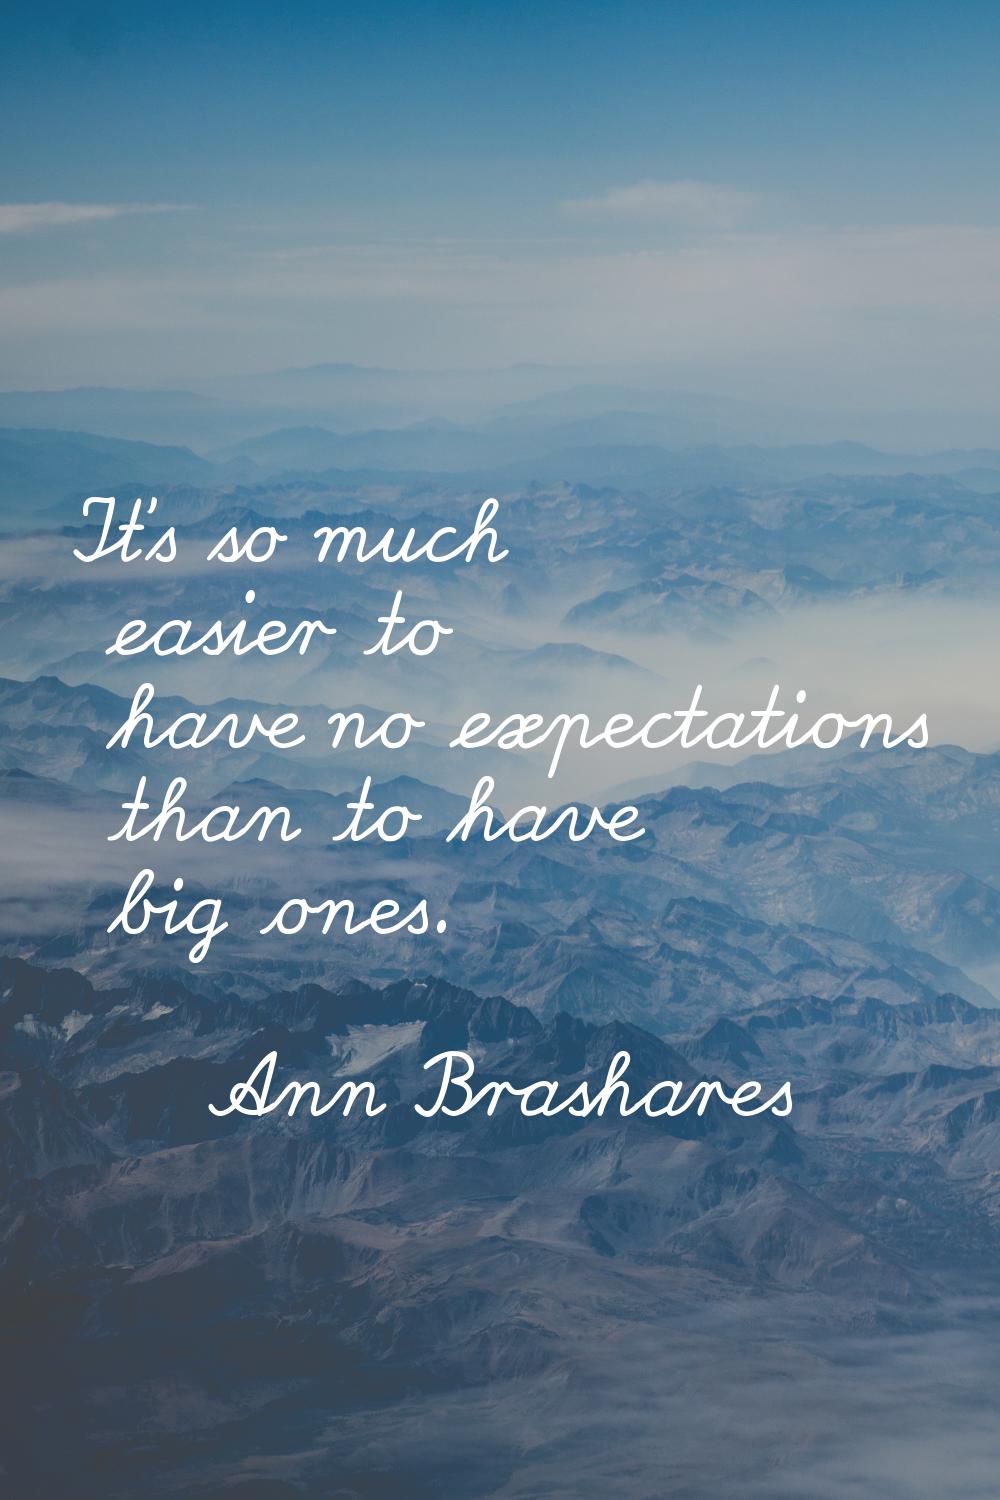 It's so much easier to have no expectations than to have big ones.